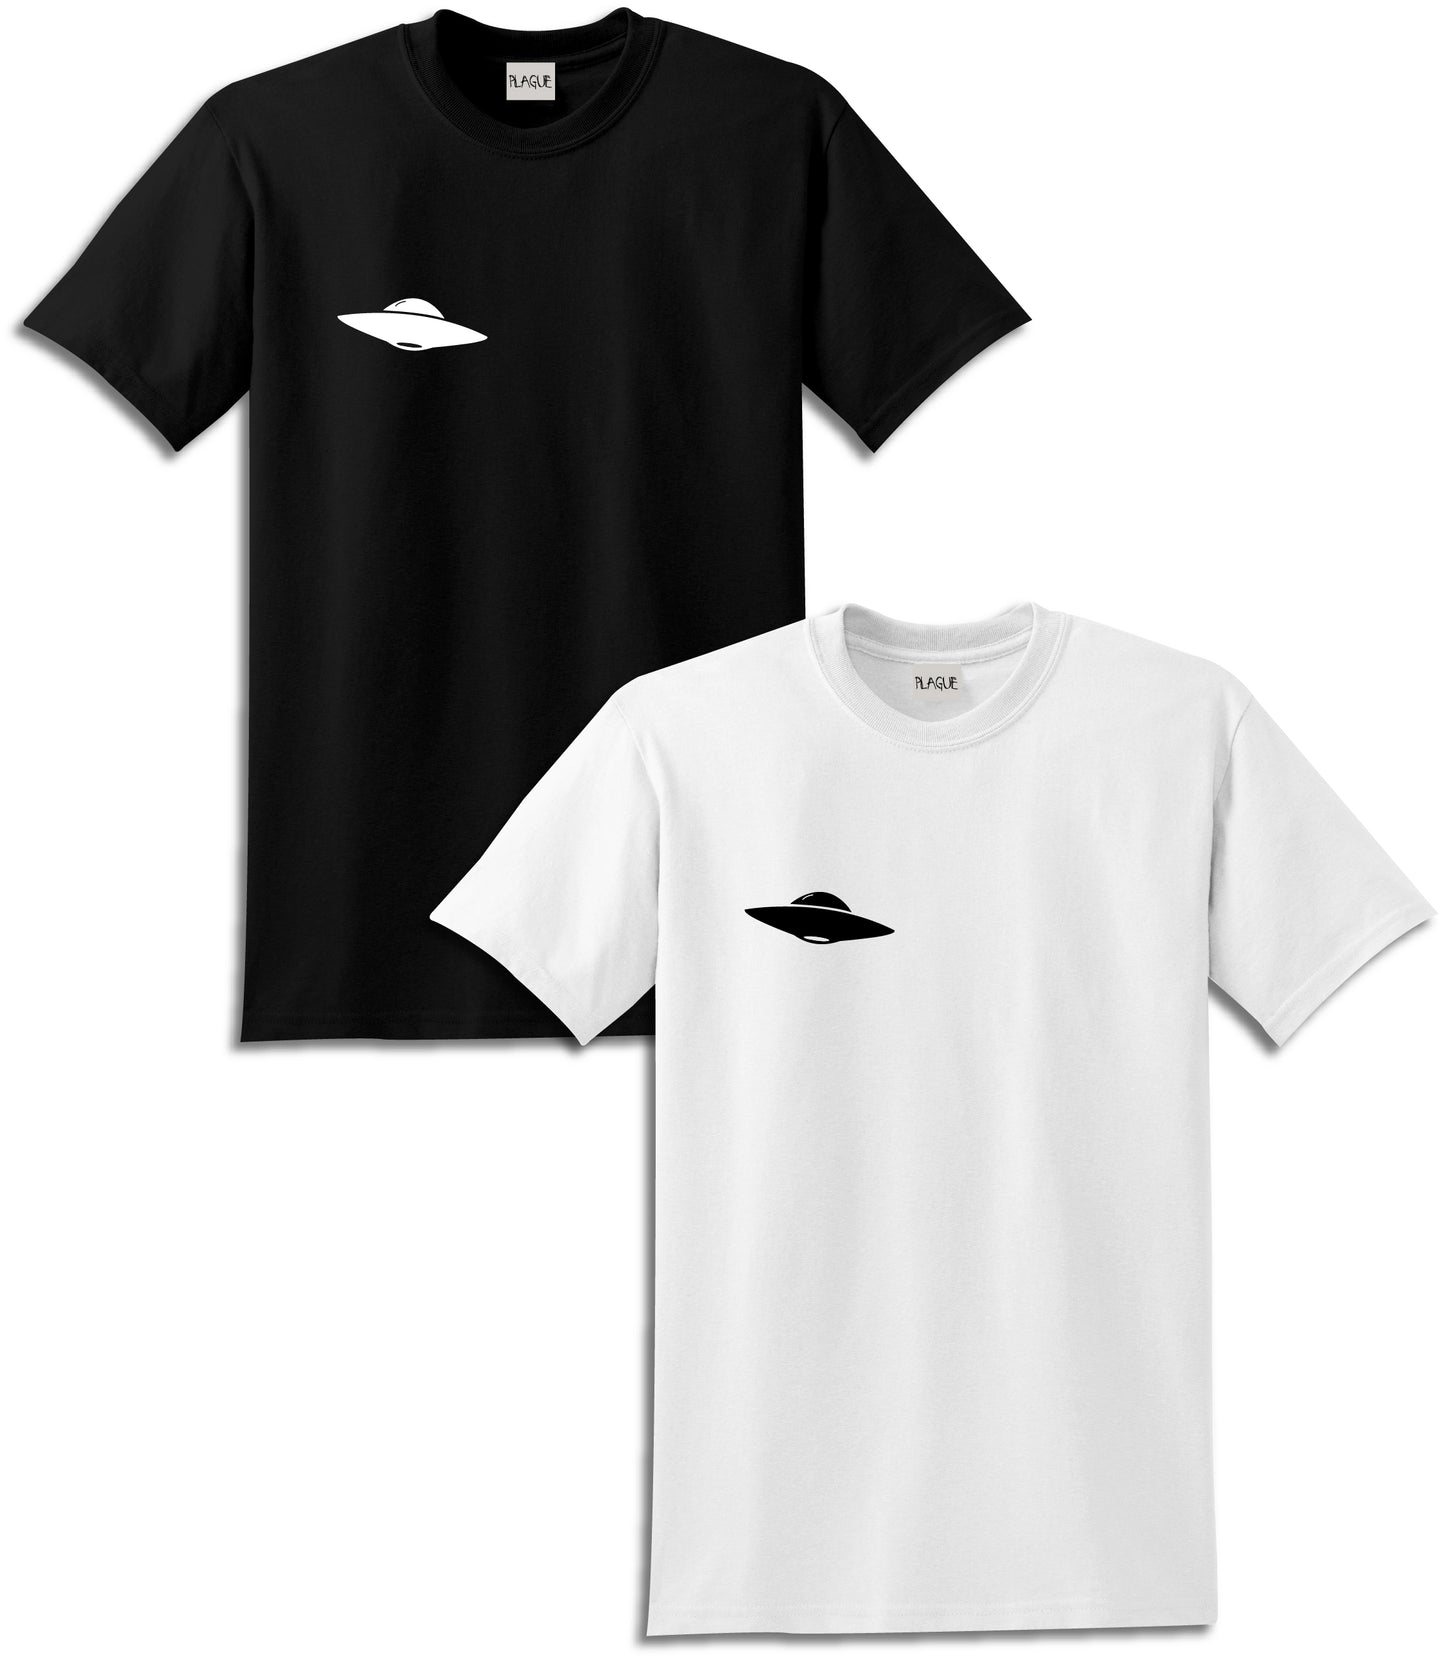 Small pocket area design of a UFO. Available in black and white.